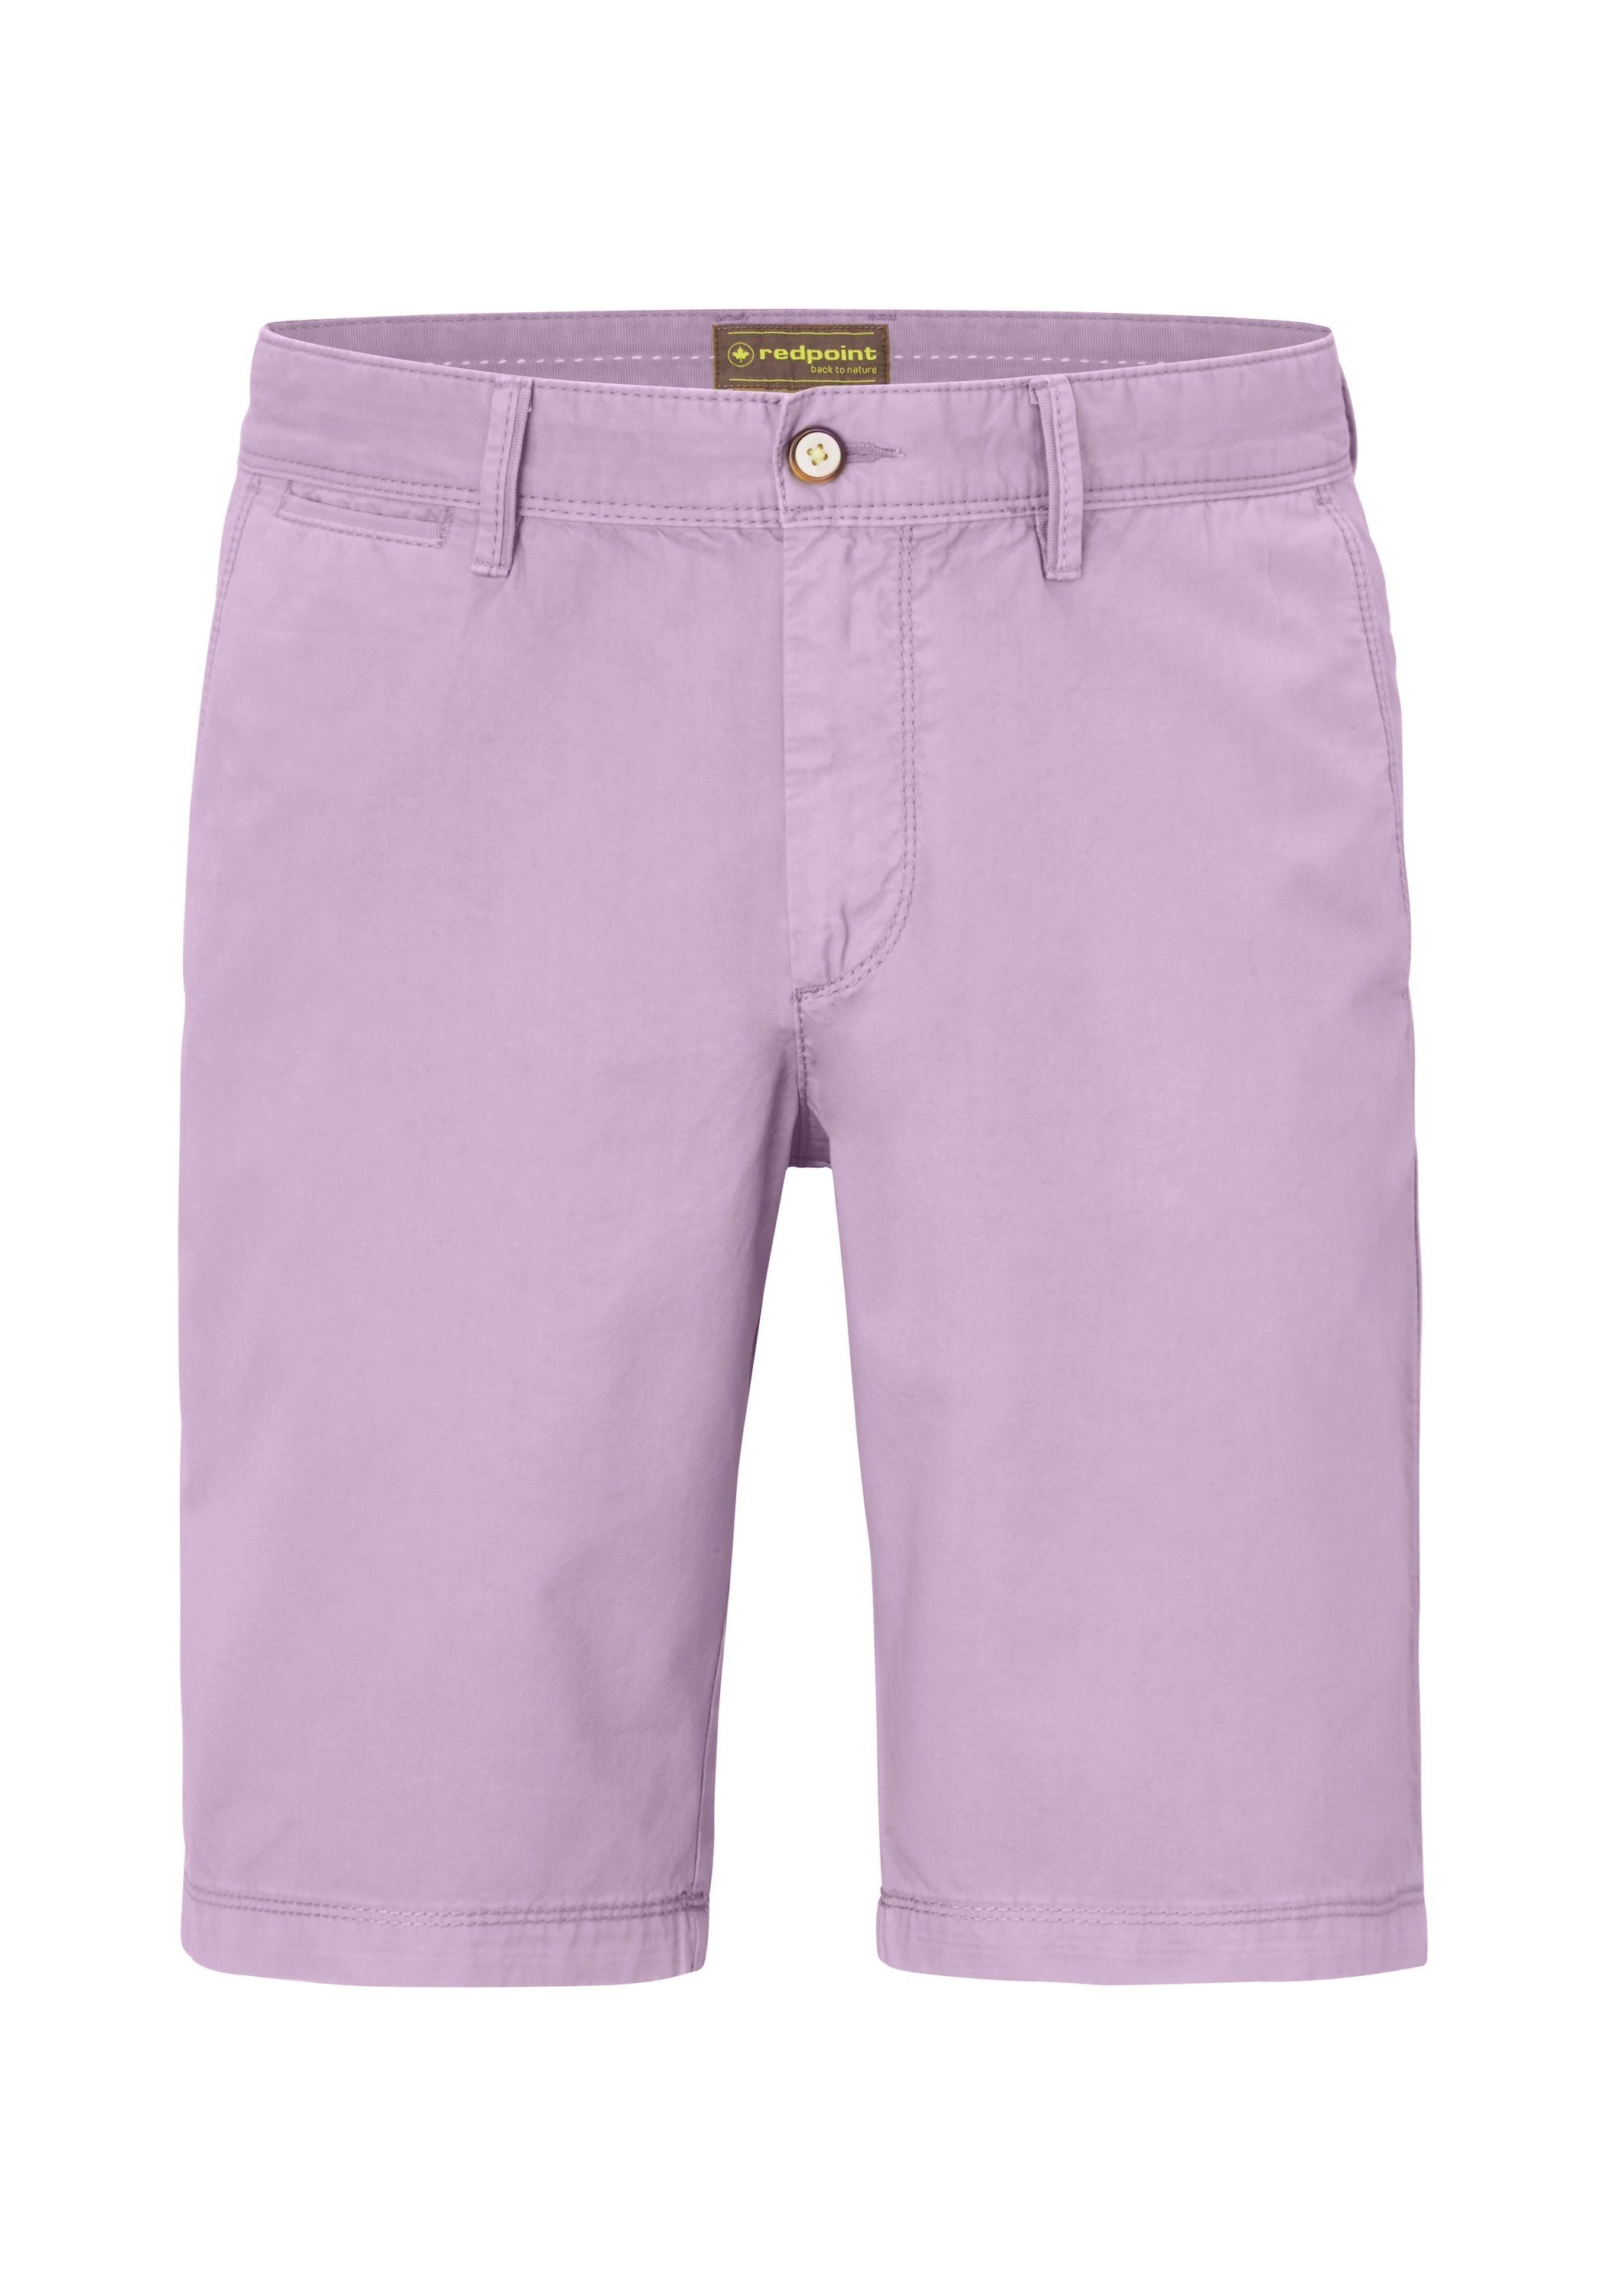 16 Surray Chinoshorts Bermudas Edition Shades pale Moderne Redpoint Chino - lilac